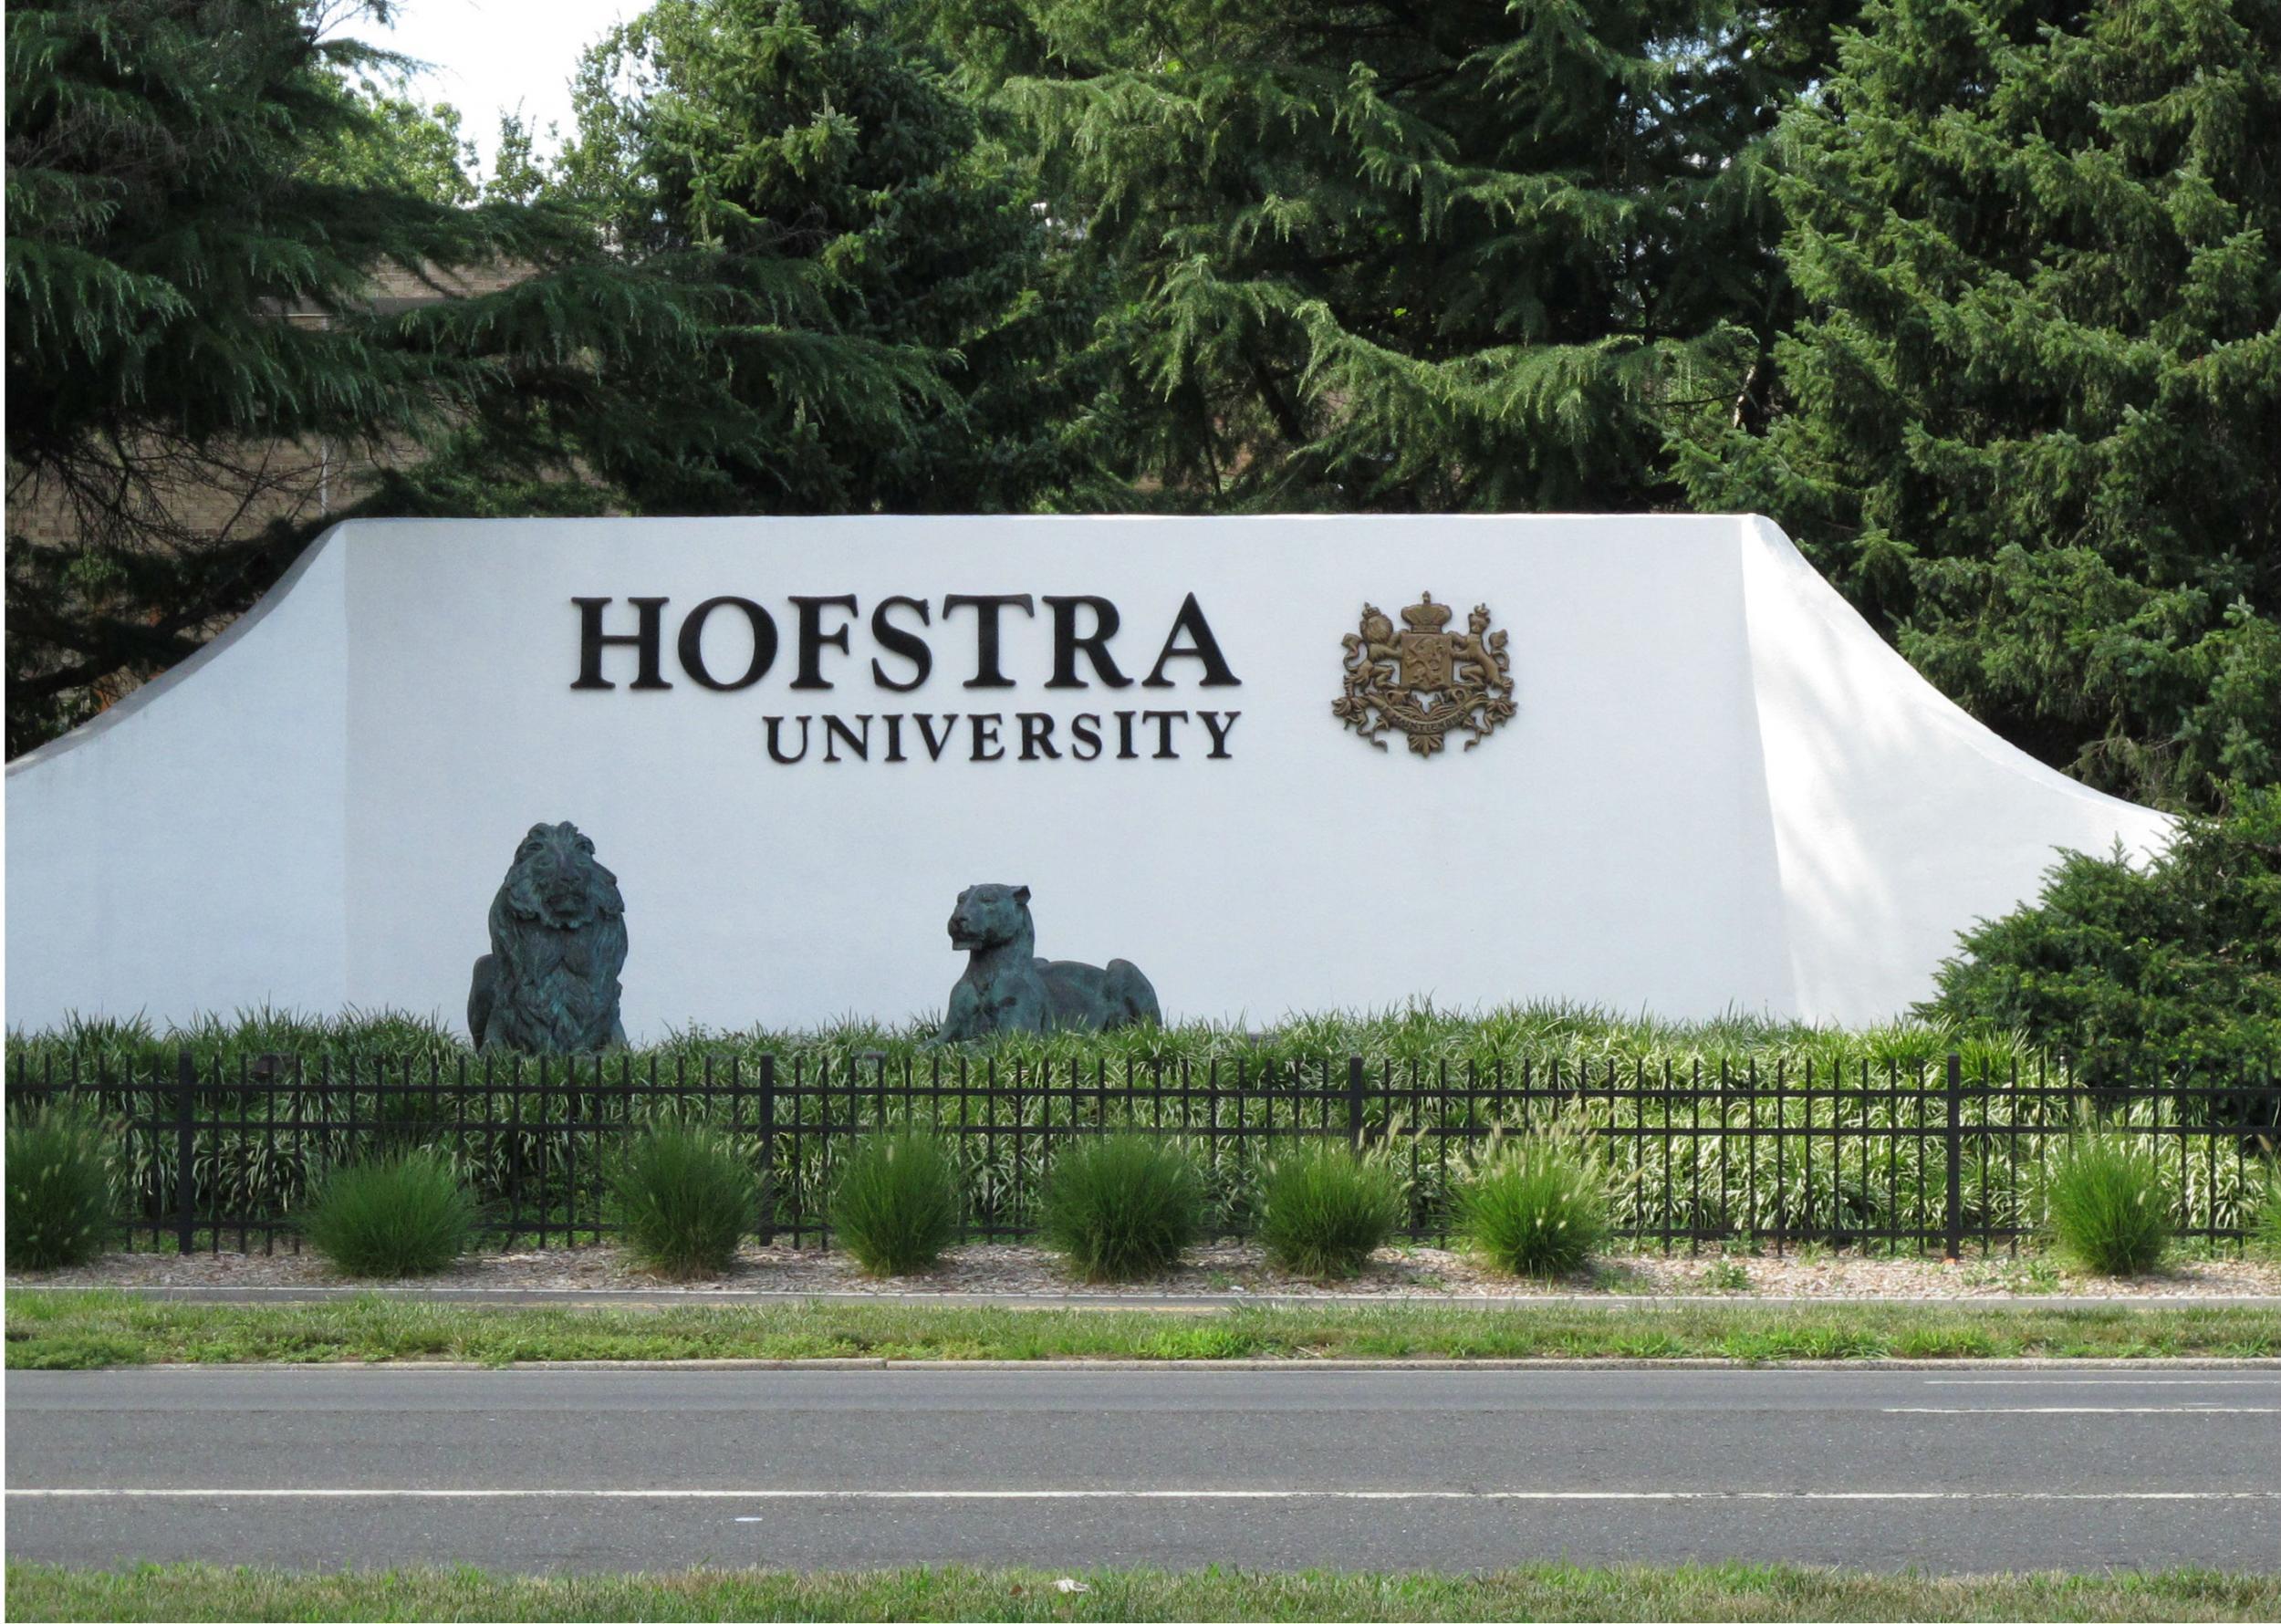 The entrance to Hofstra University, venue for the first Clinton-Trump debate in September